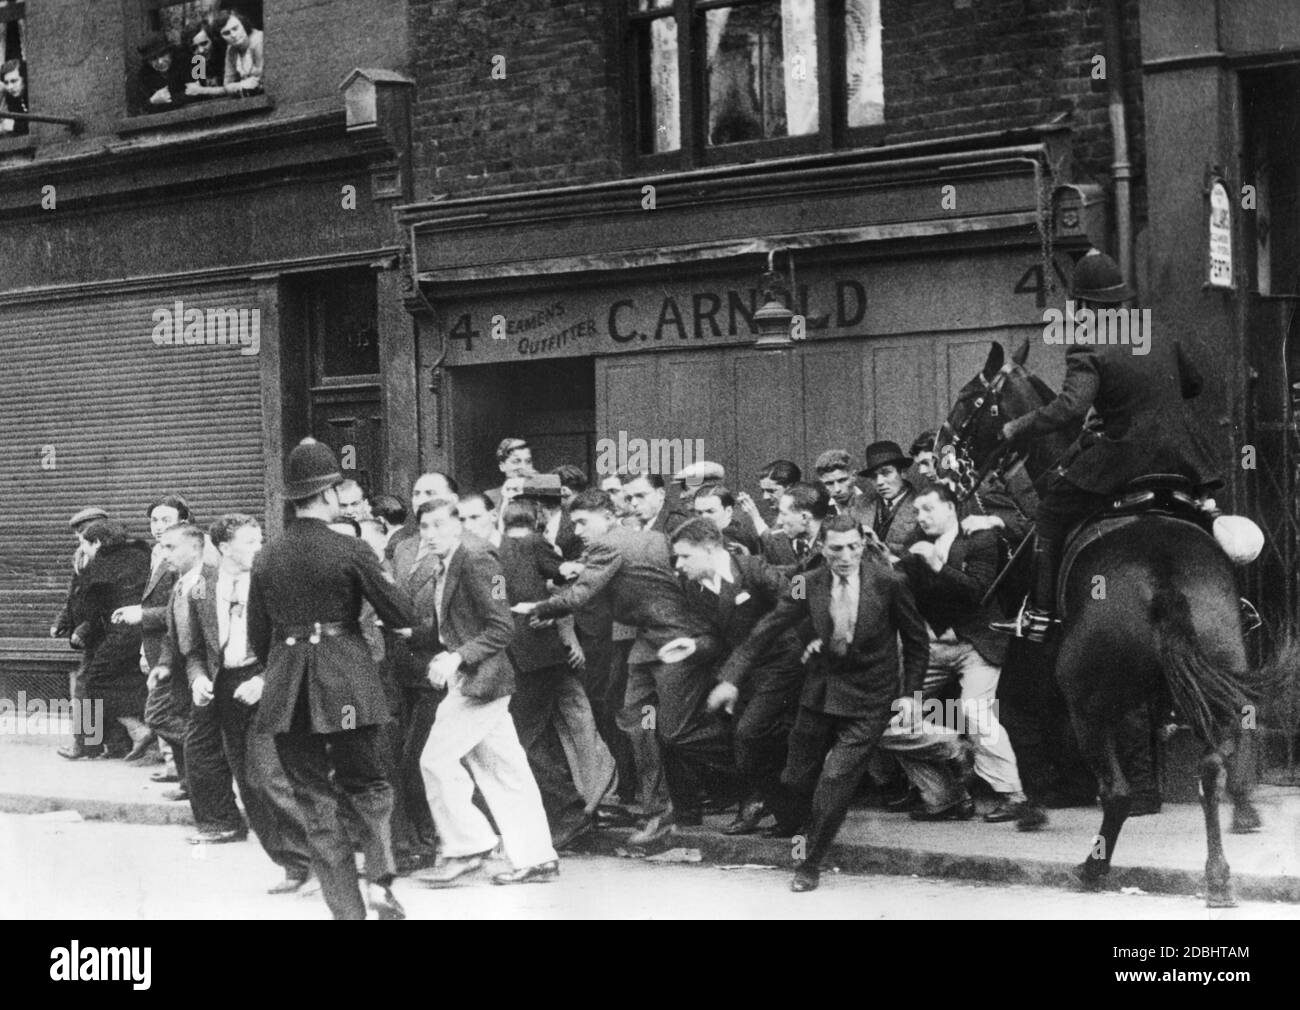 "Clashes between demonstrators and police in London. On the occasion of a planned march of the ""British Union of Fascists"" (BUF) through Whitechapel, numerous counter-demonstrators had gathered in London." Stock Photo